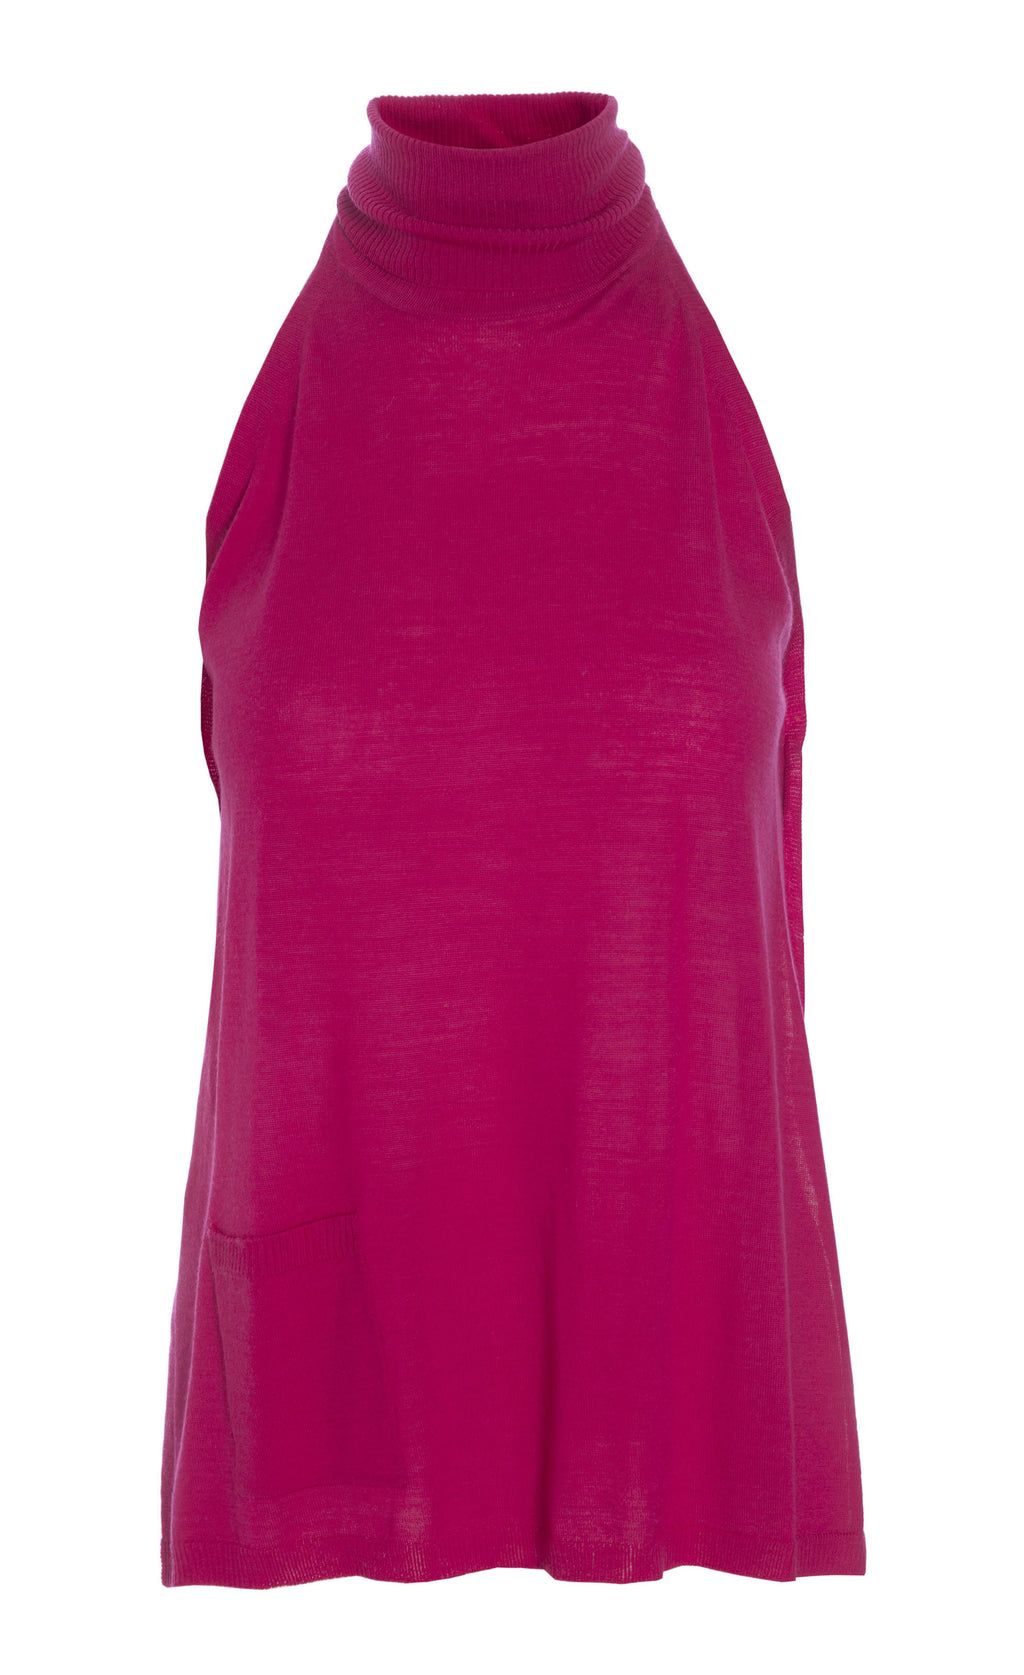 Front view of the bitte kai rand wool front piece in the color ruby pink. This front piece has a single front pocket on the bottom right side, no sleeves, and a turtleneck.